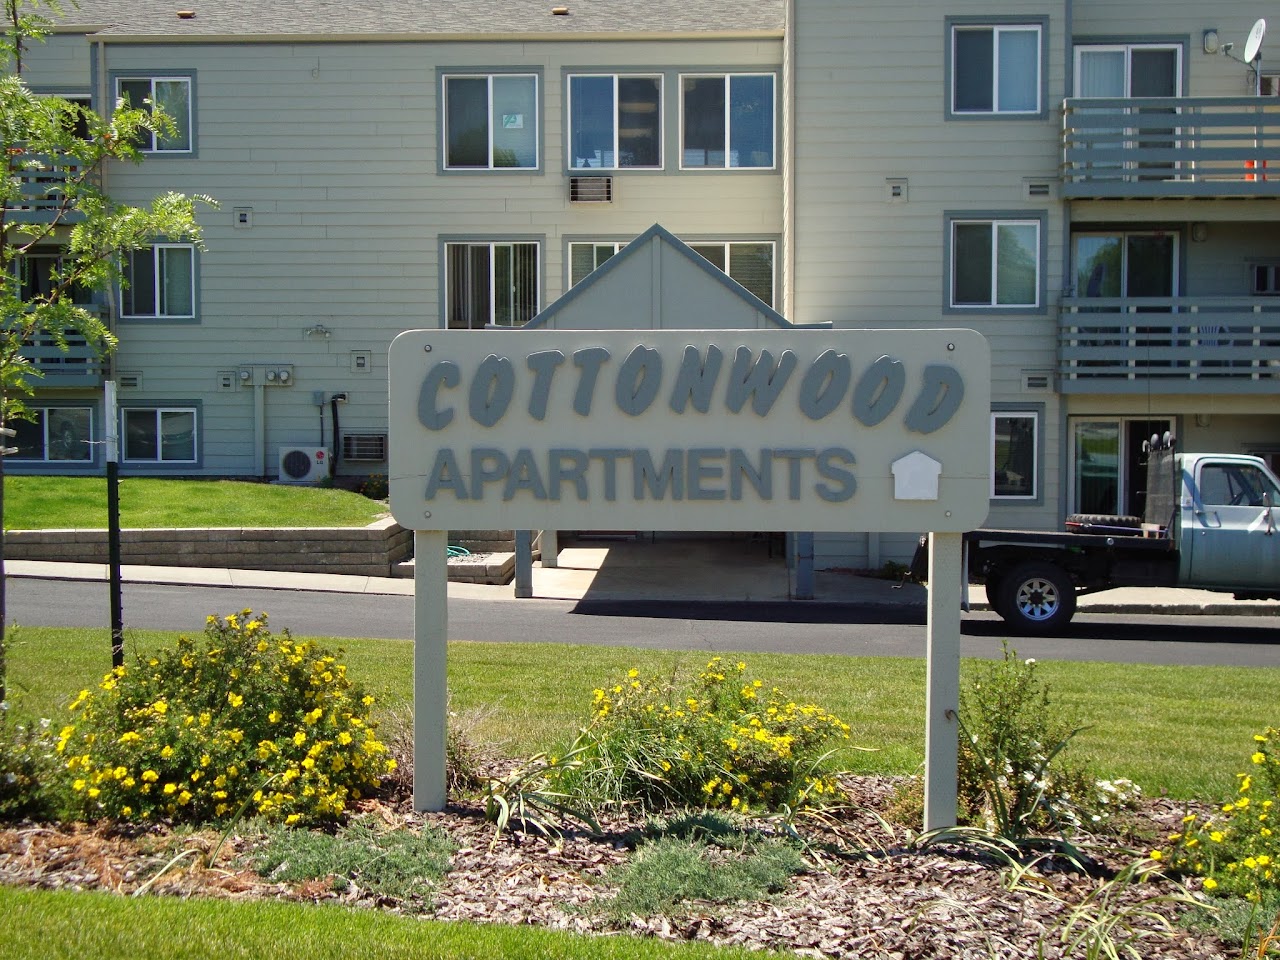 Photo of COTTONWOOD II. Affordable housing located at 750 SE SIXTH ST HERMISTON, OR 97838